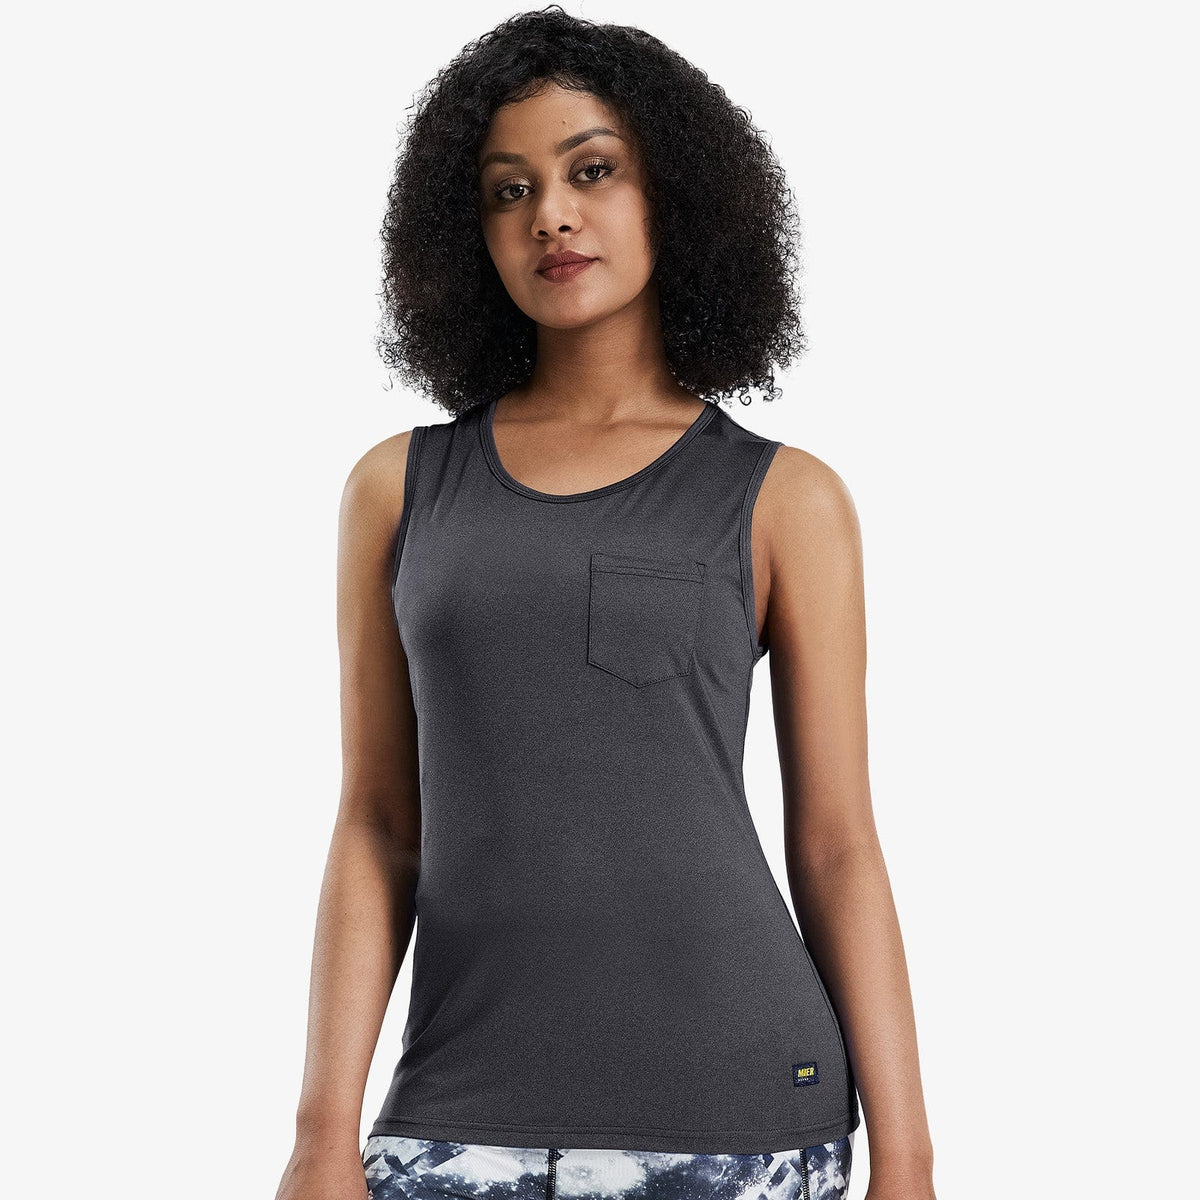 MIER Women Workout Tank Shirts Fit Top Athletic Dry